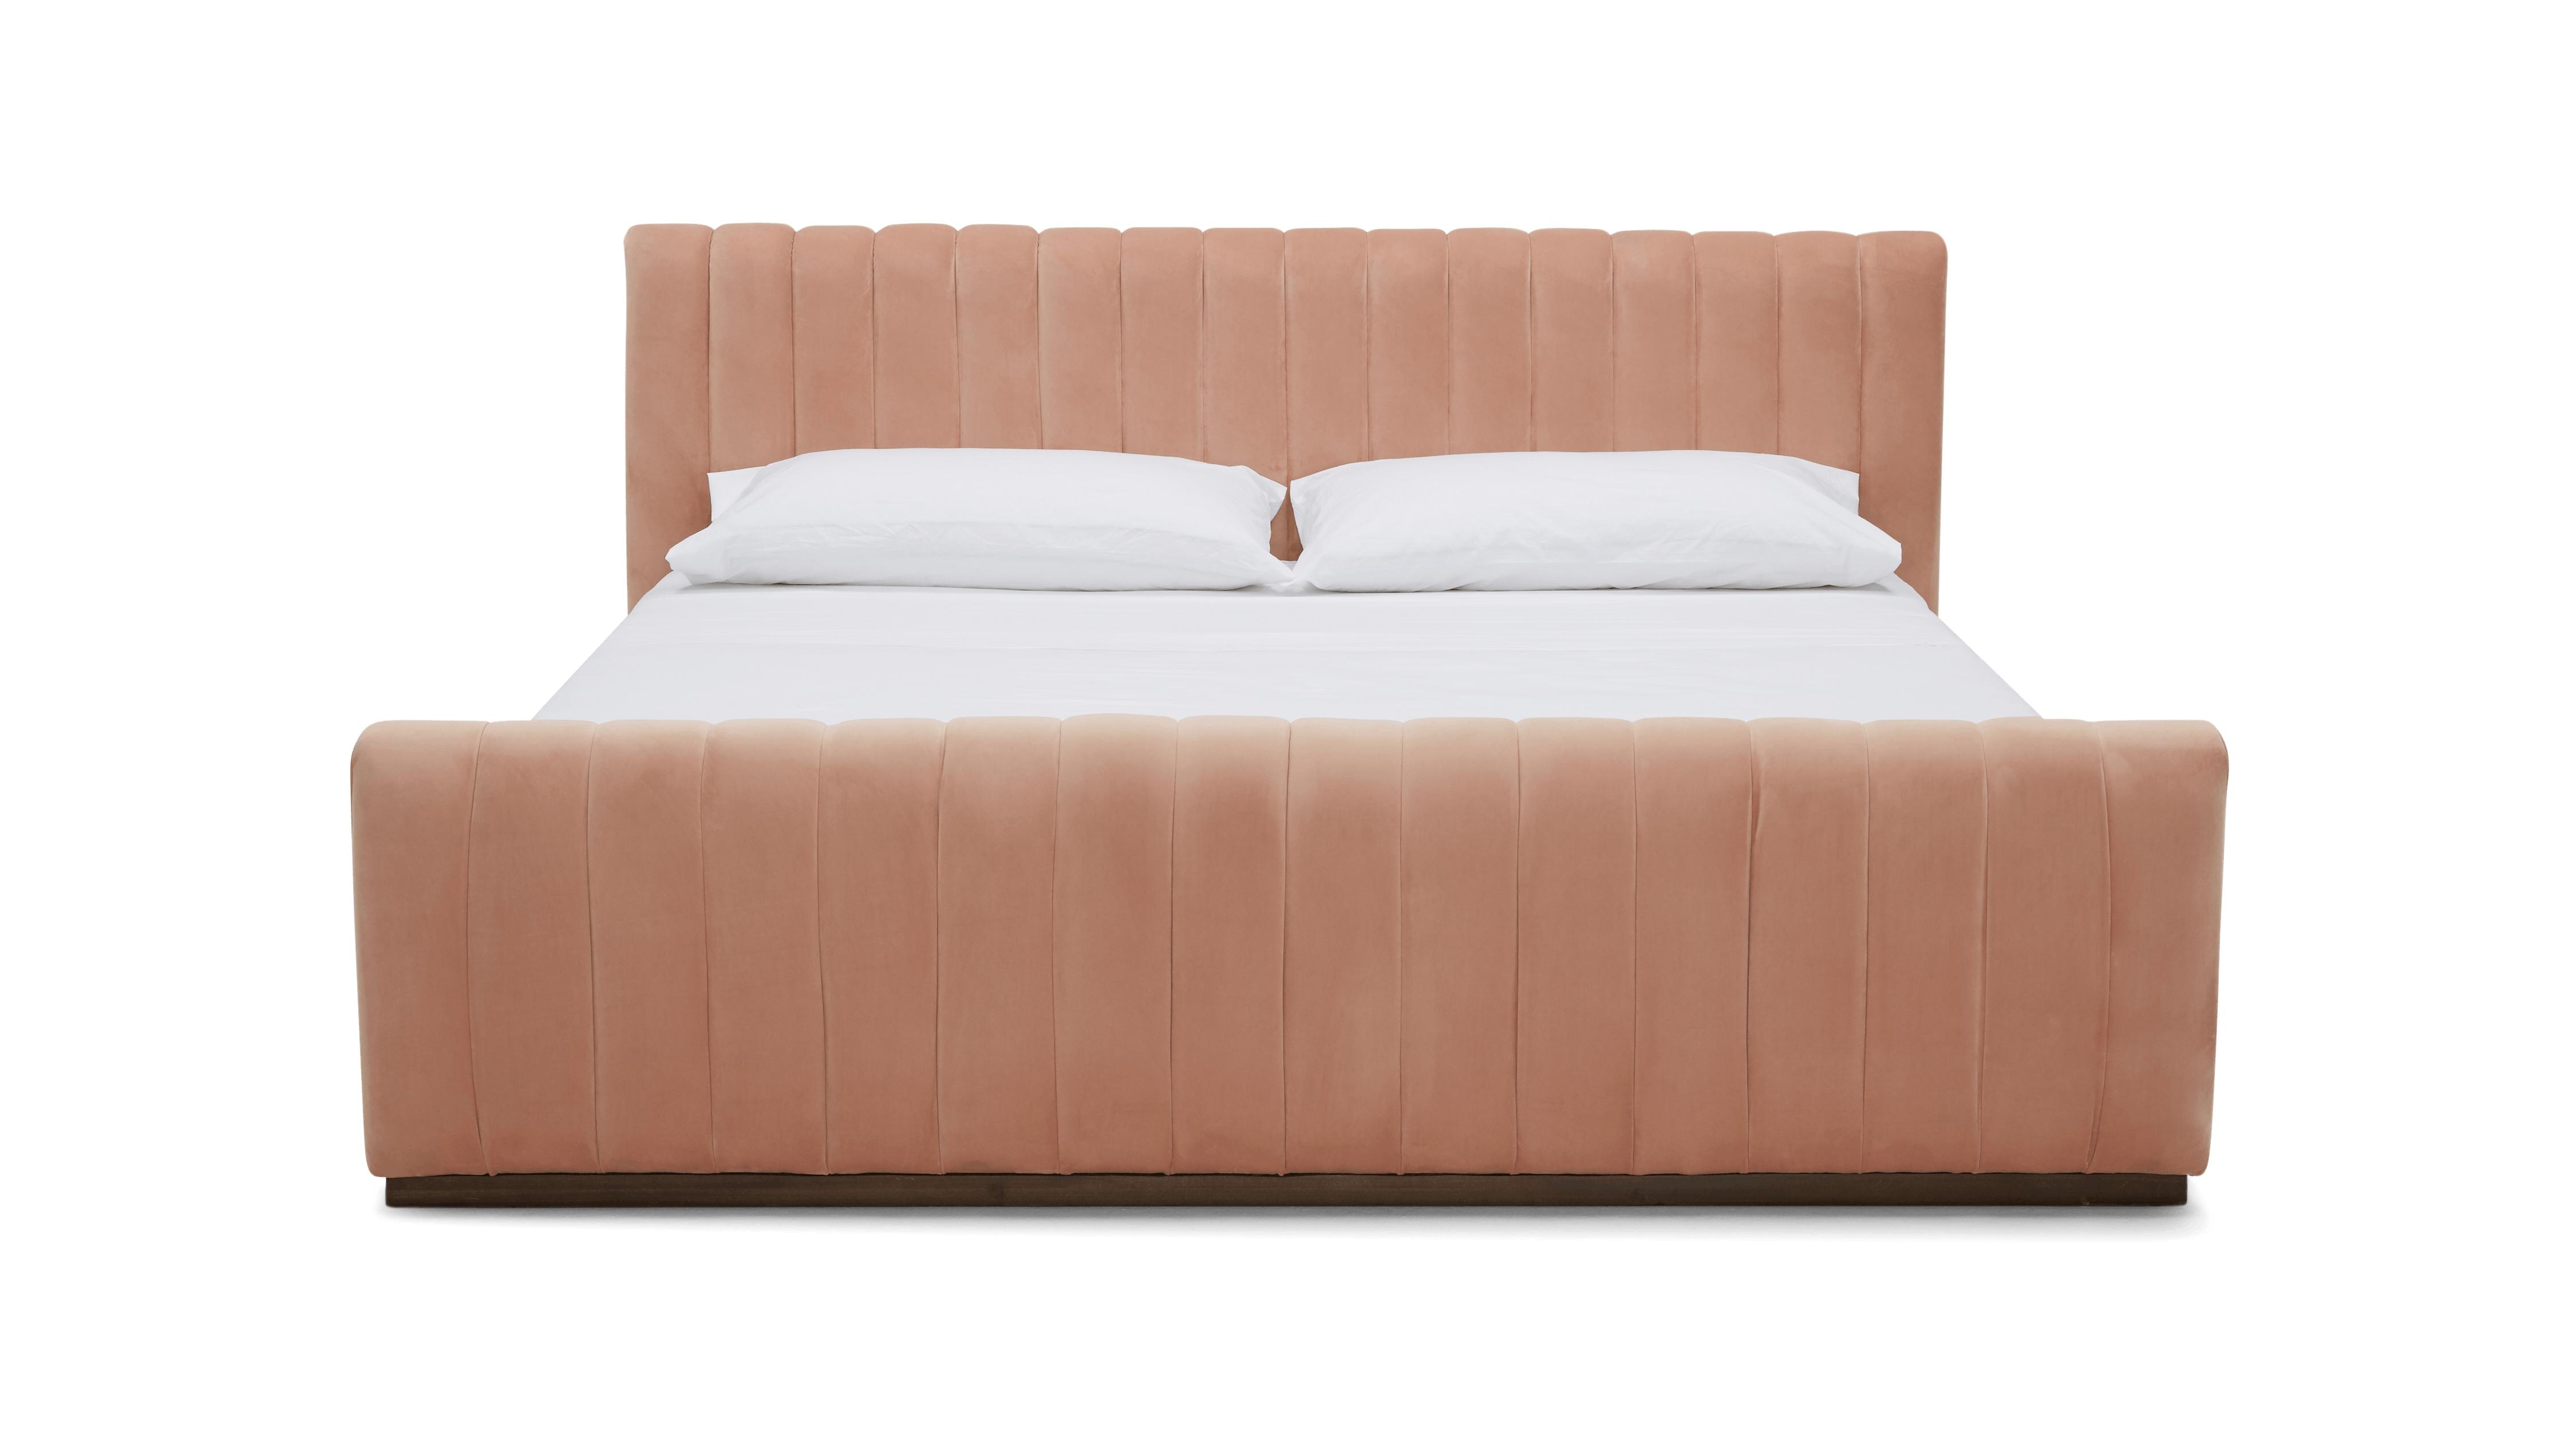 Pink Camille Mid Century Modern Bed - Royale Blush - Mocha - Queen - Image 0